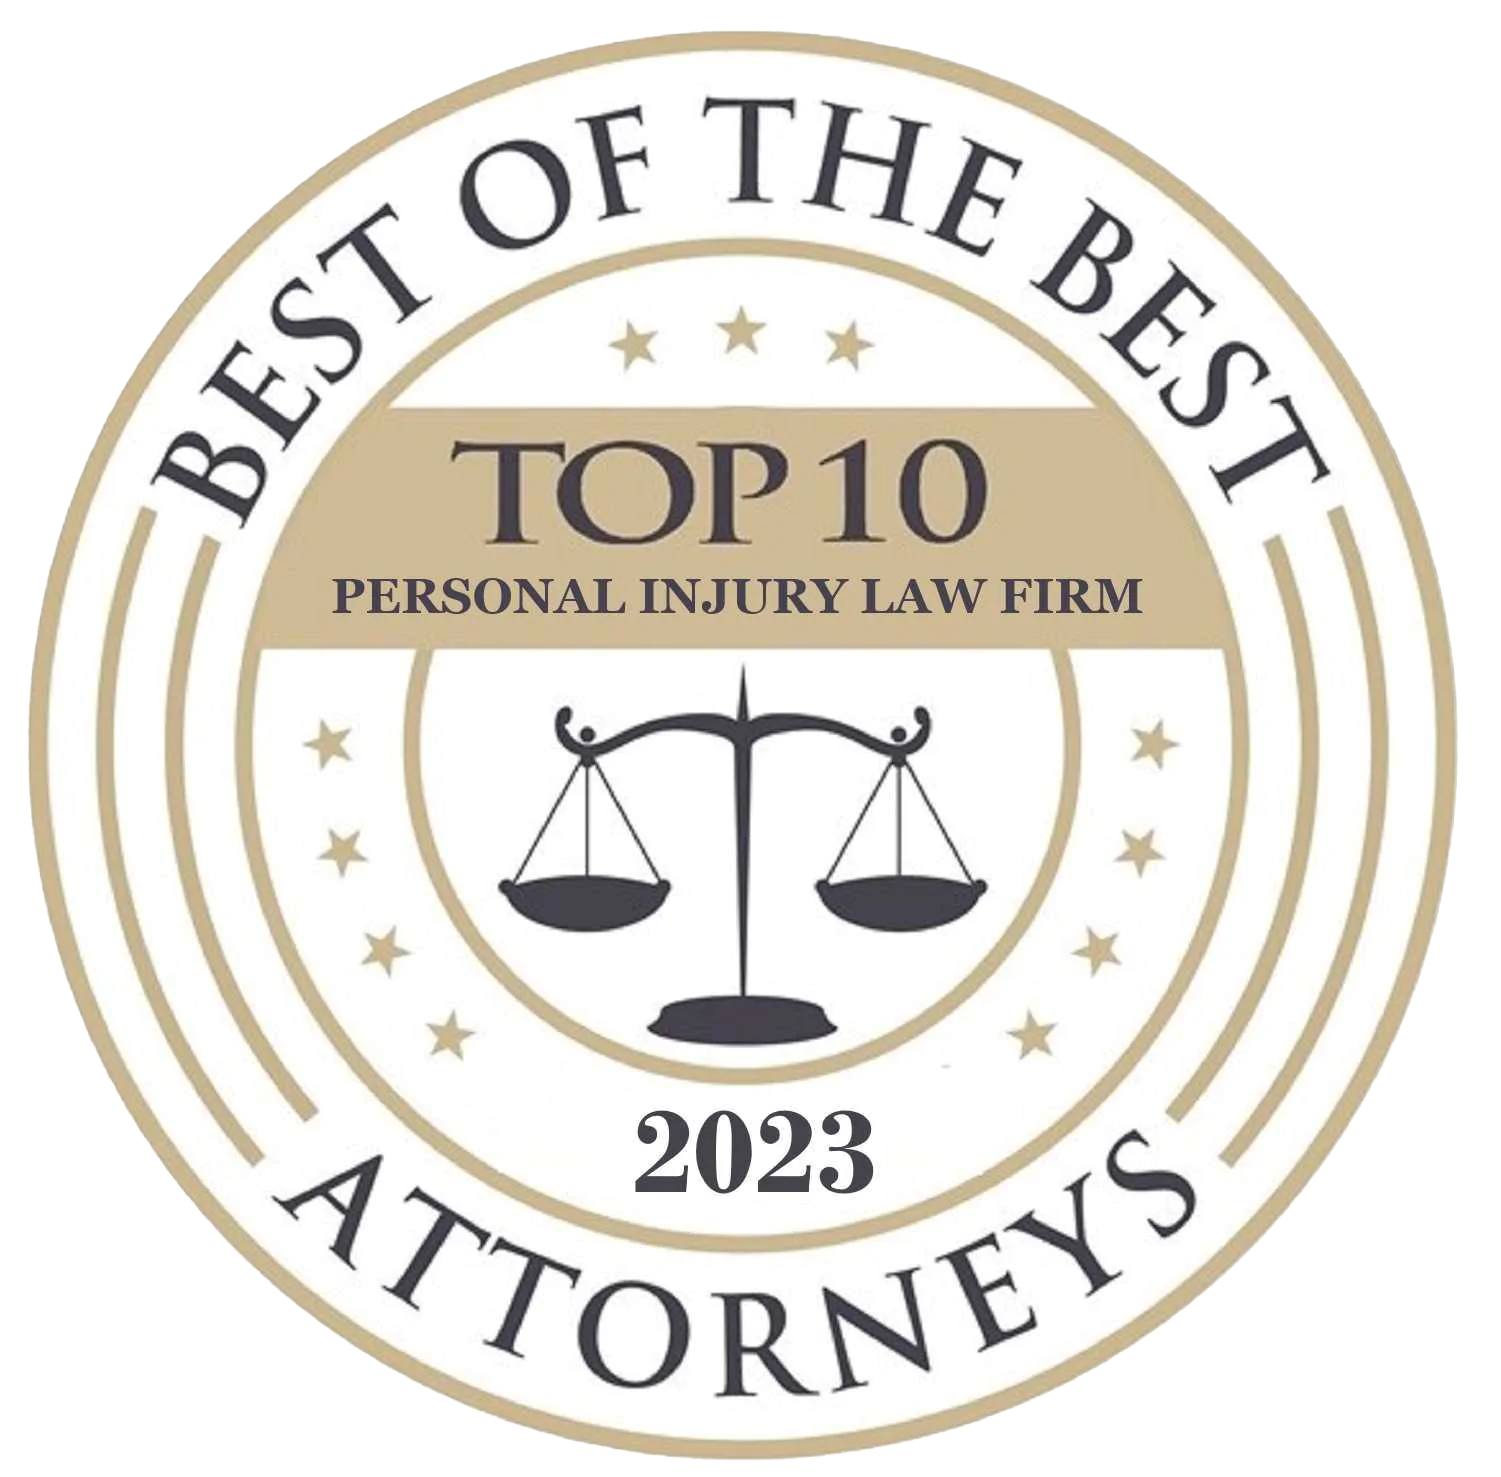 top 10 injury law firm award